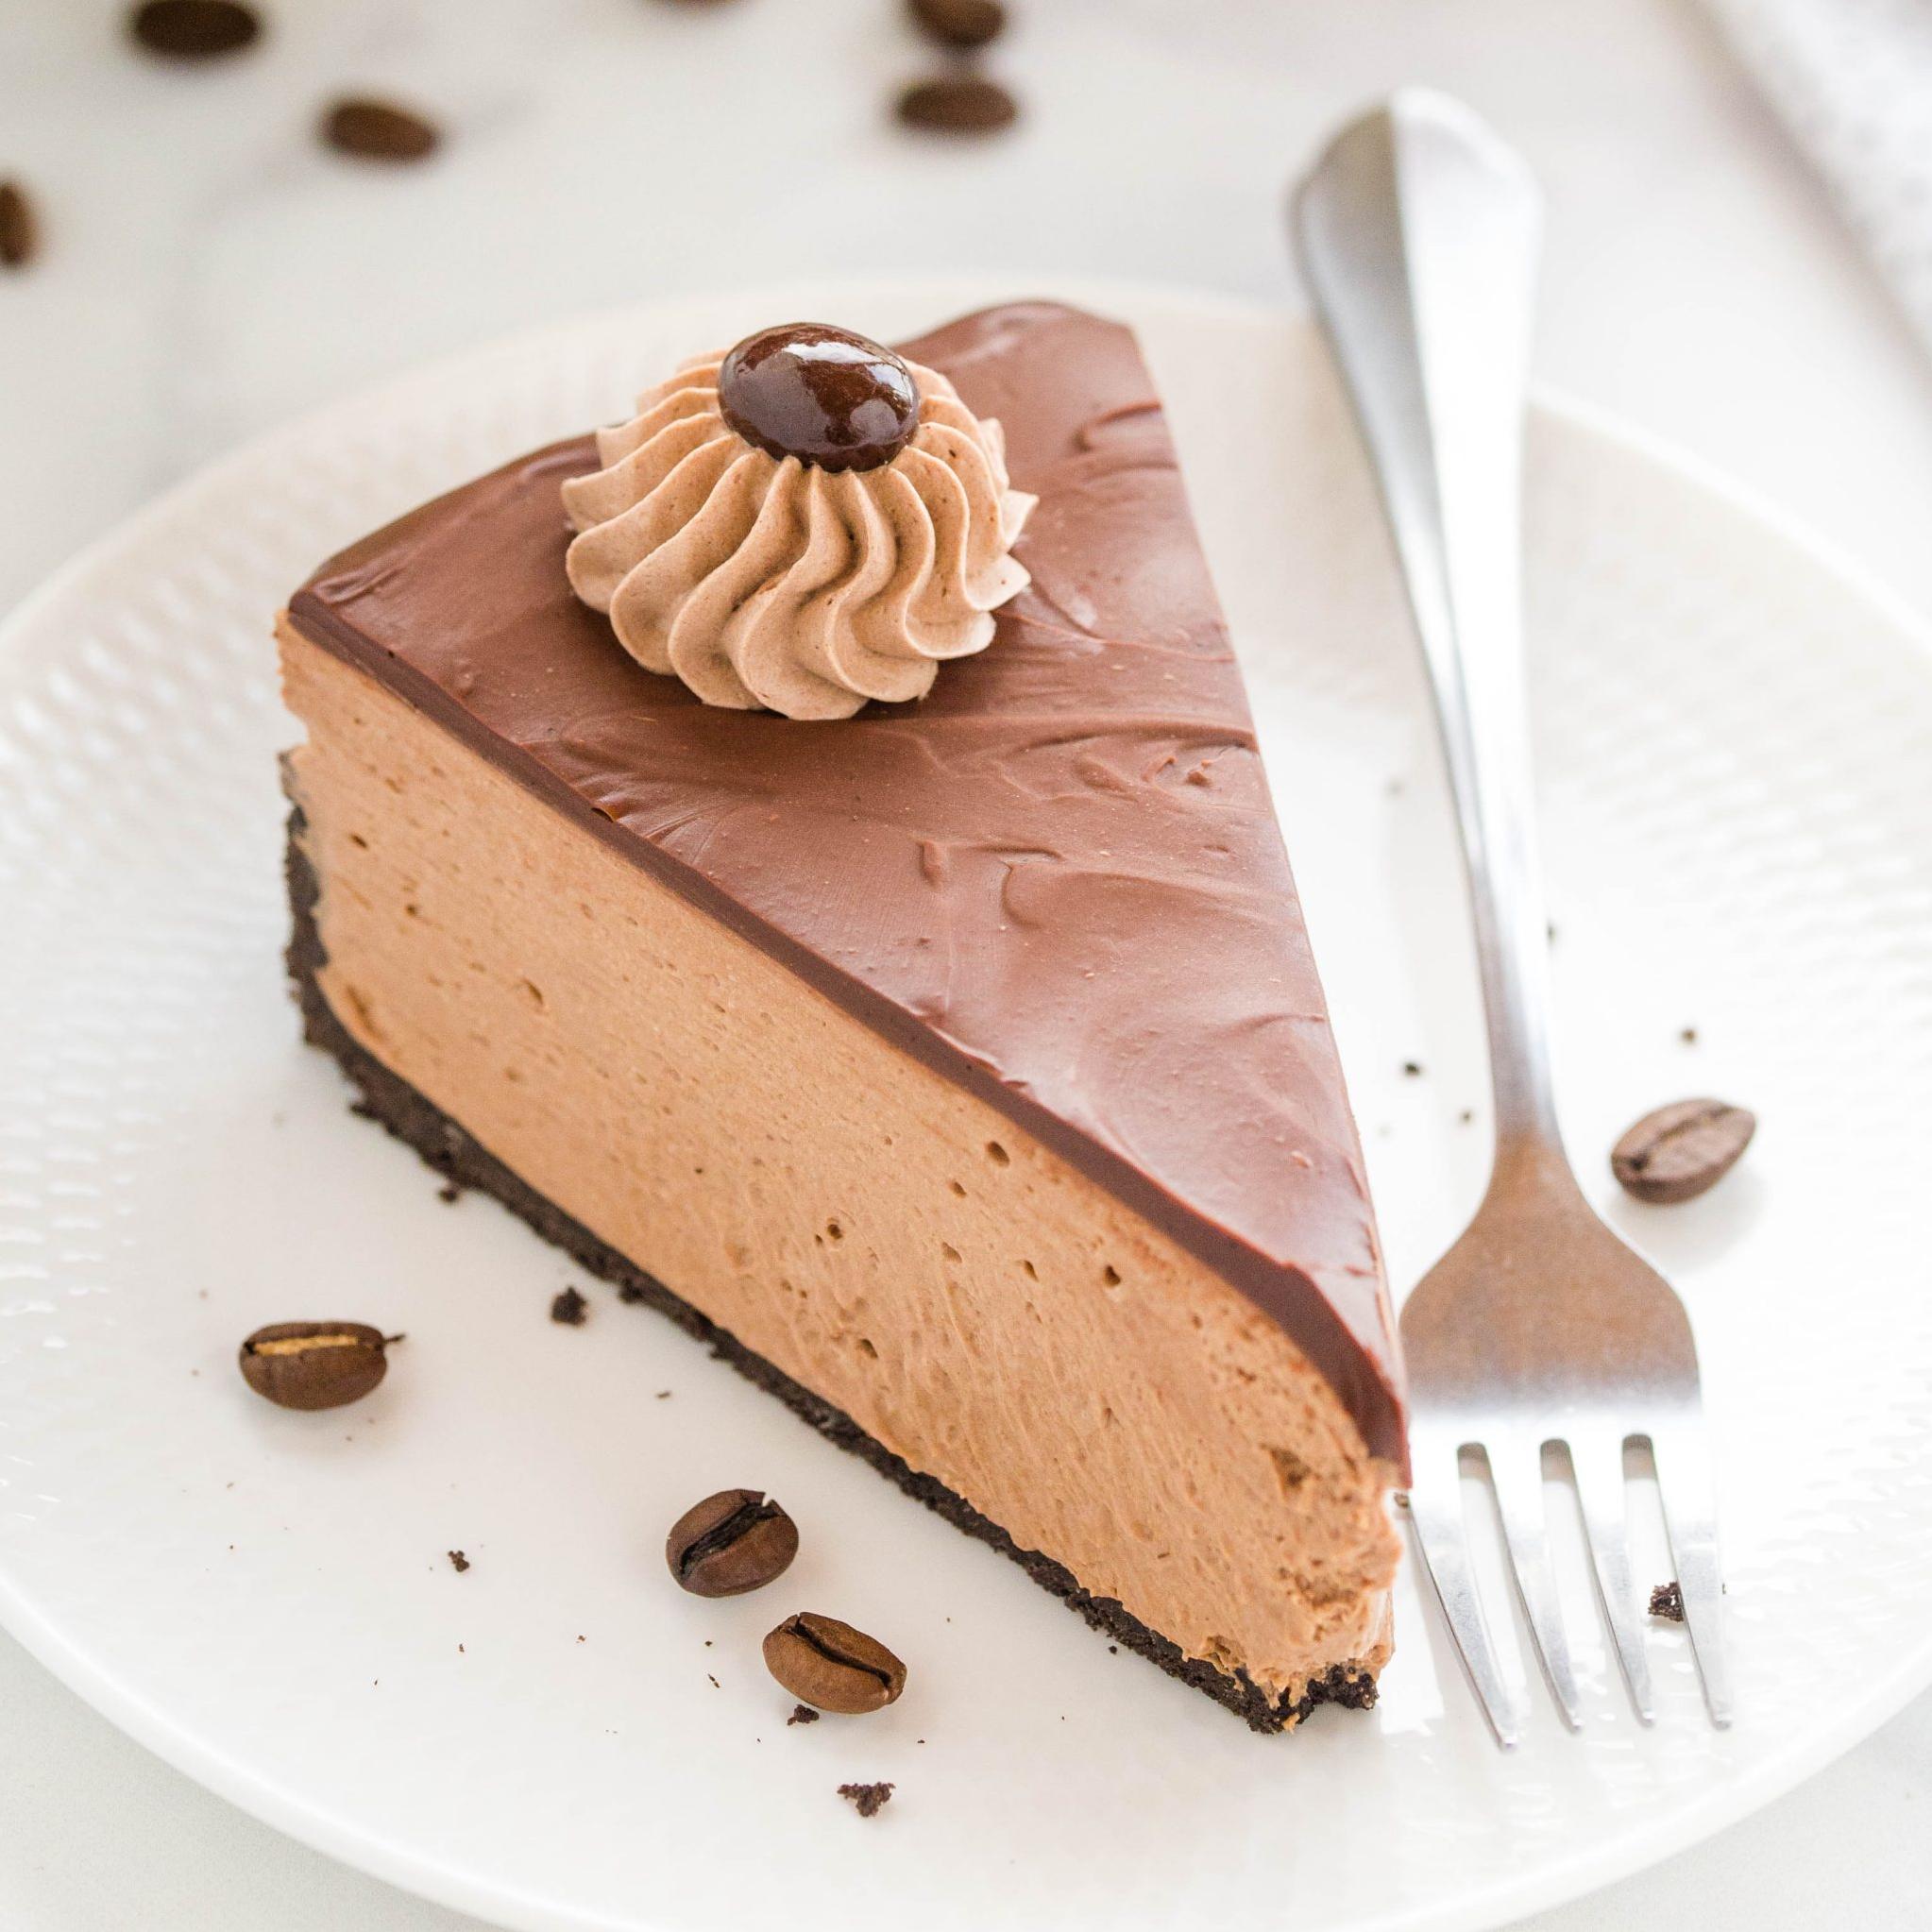  Don't skimp on the coffee cream! It adds the perfect balance to the sweetness of the chocolate cheesecake.